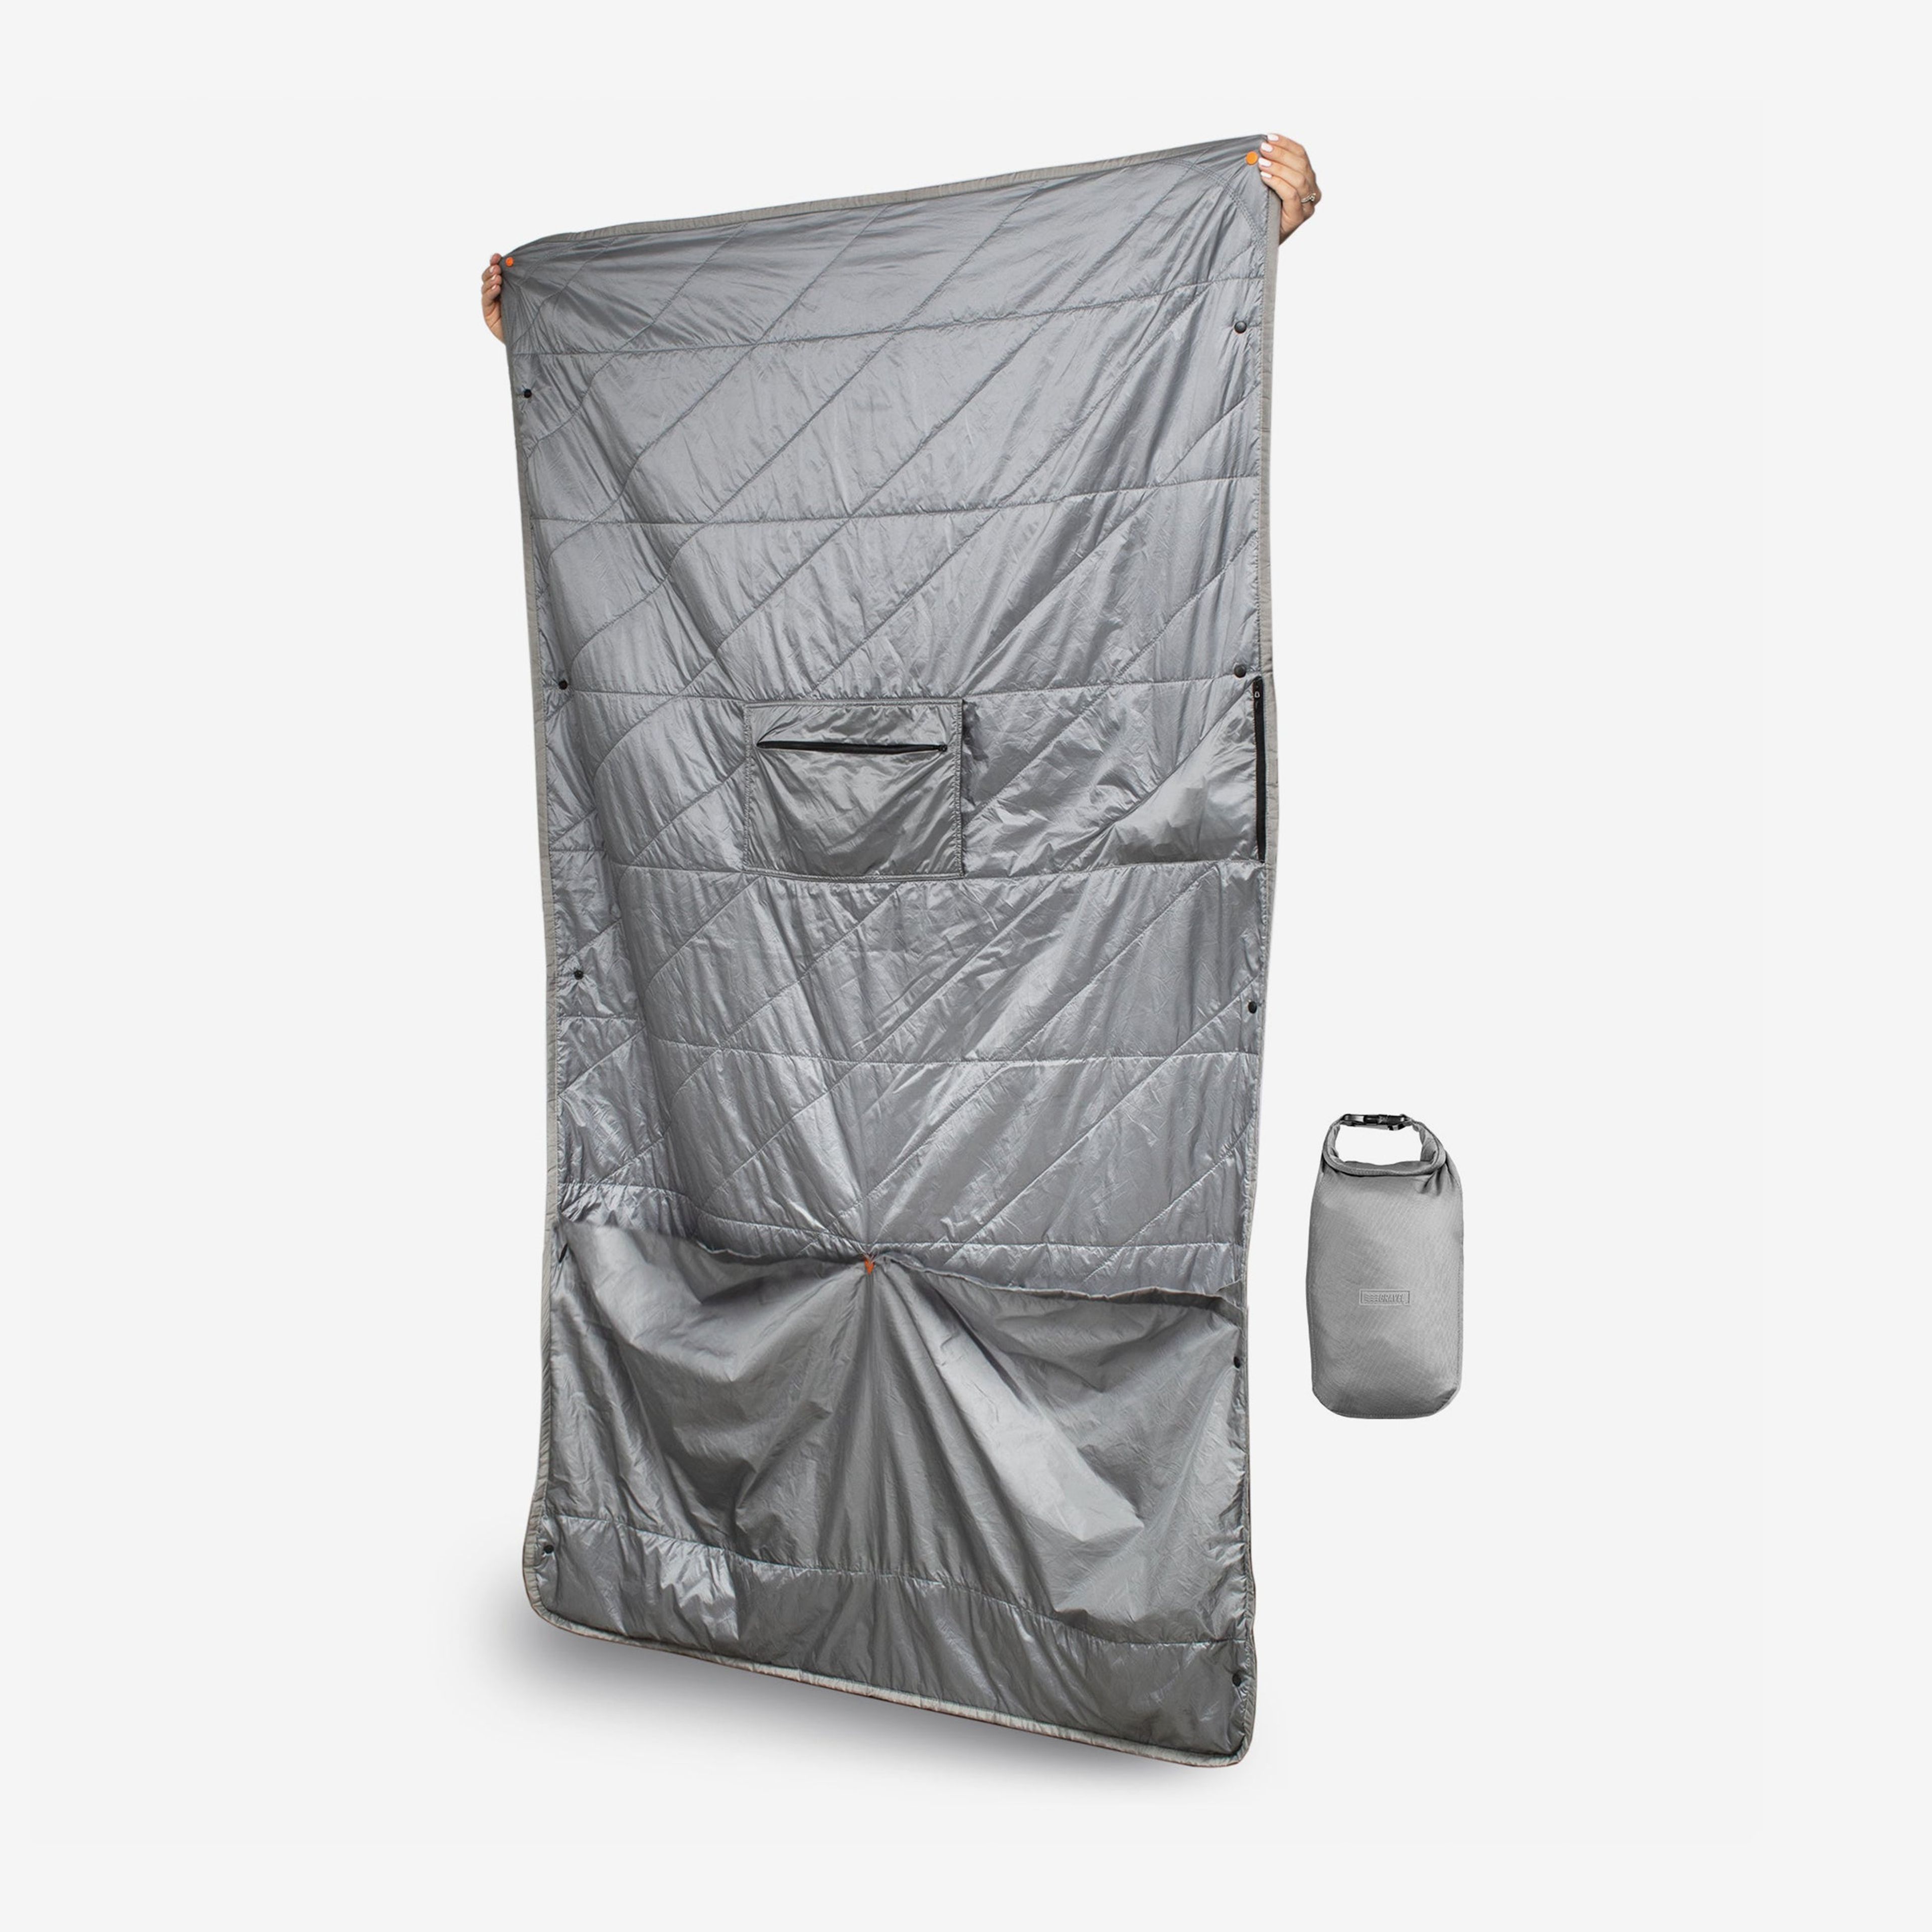 Layover Travel Blanket - Insulated & Packable | Gray